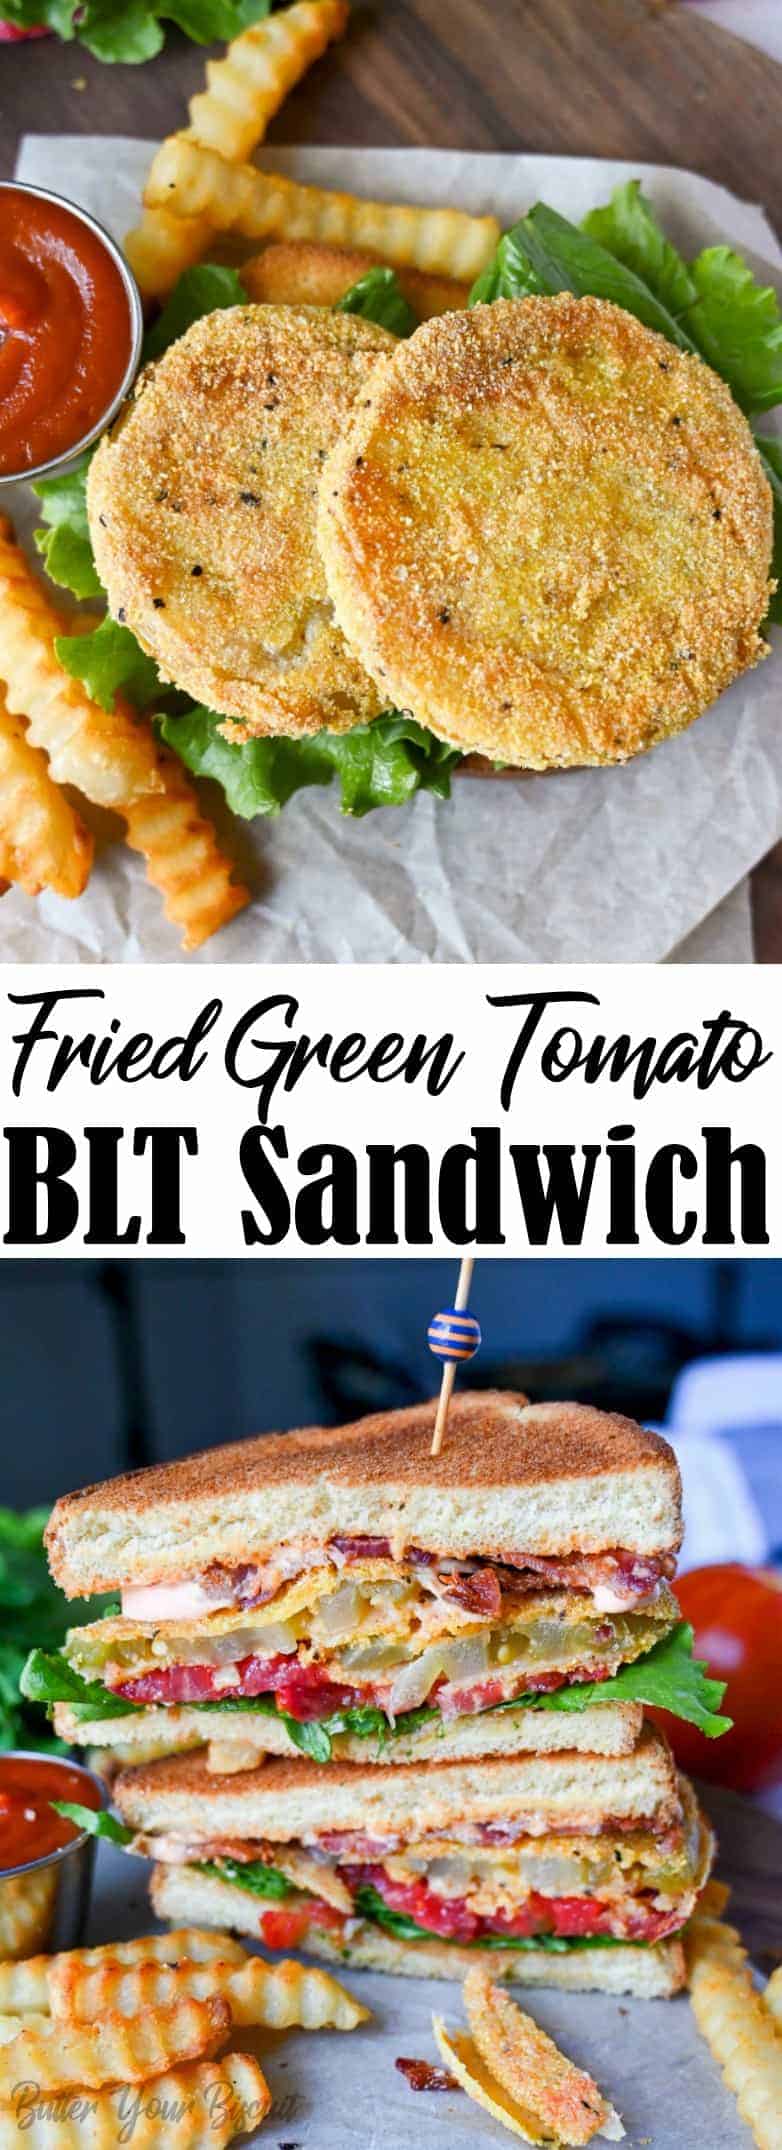 Fried Green Tomato BLT Sandwich - Butter Your Biscuit